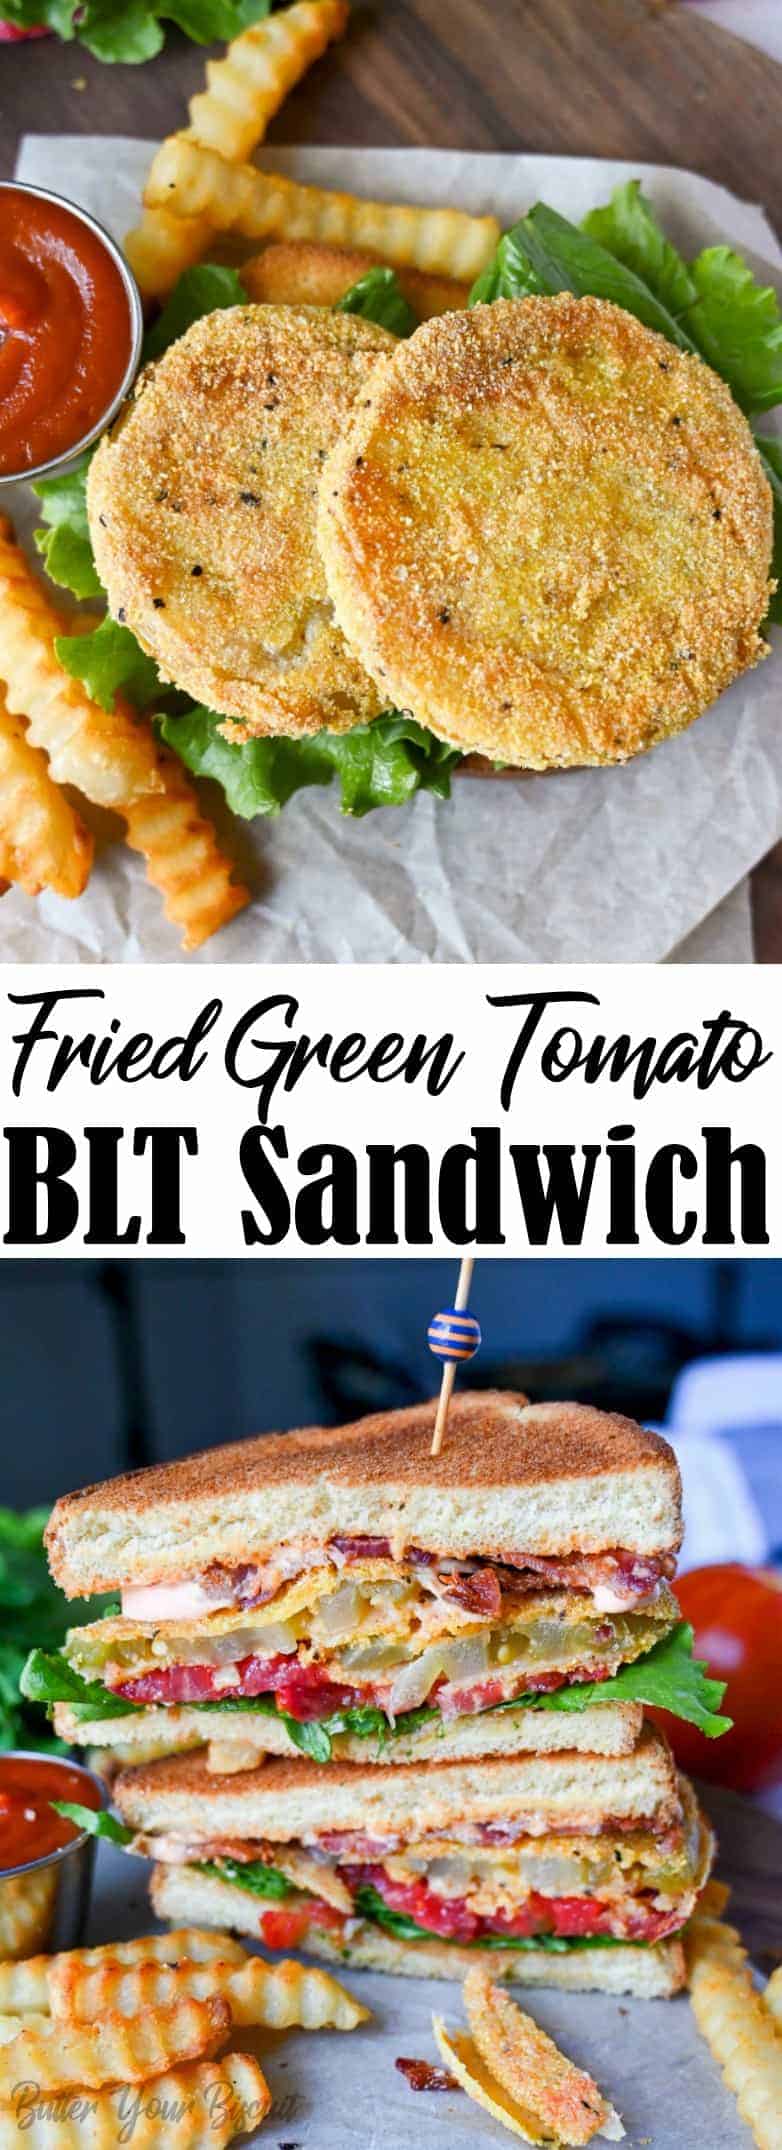 Fried Green Tomato BLT Sandwich - Butter Your Biscuit